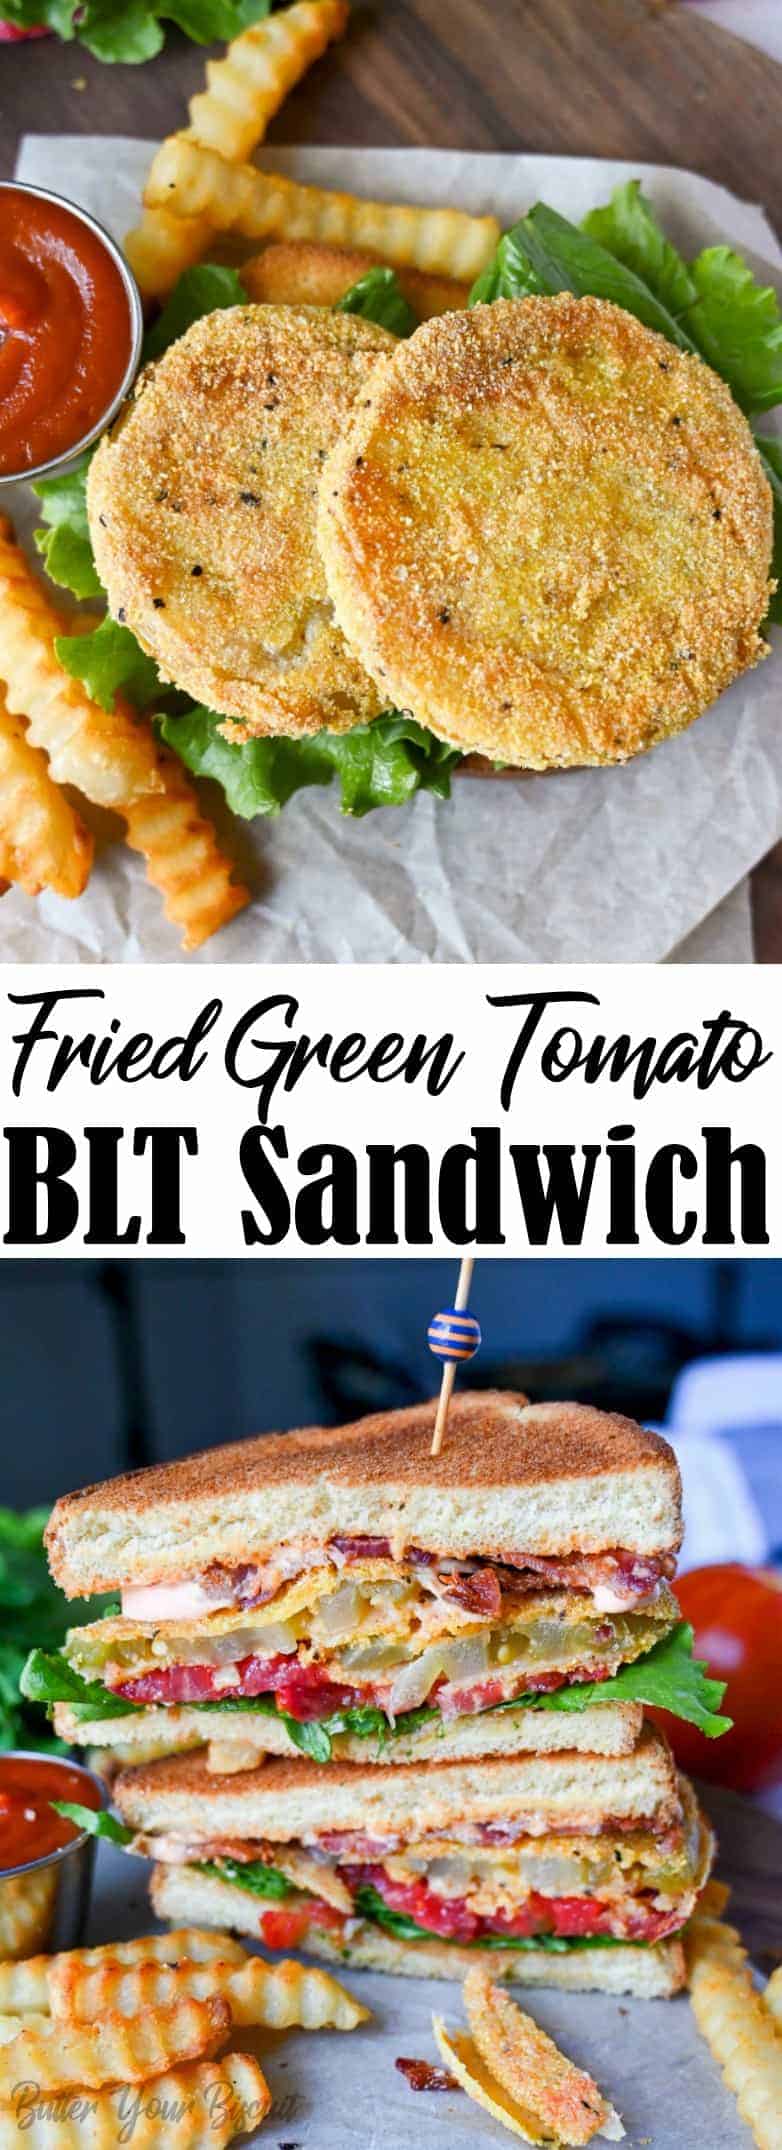 Fried Green Tomato BLT Sandwich - Butter Your Biscuit